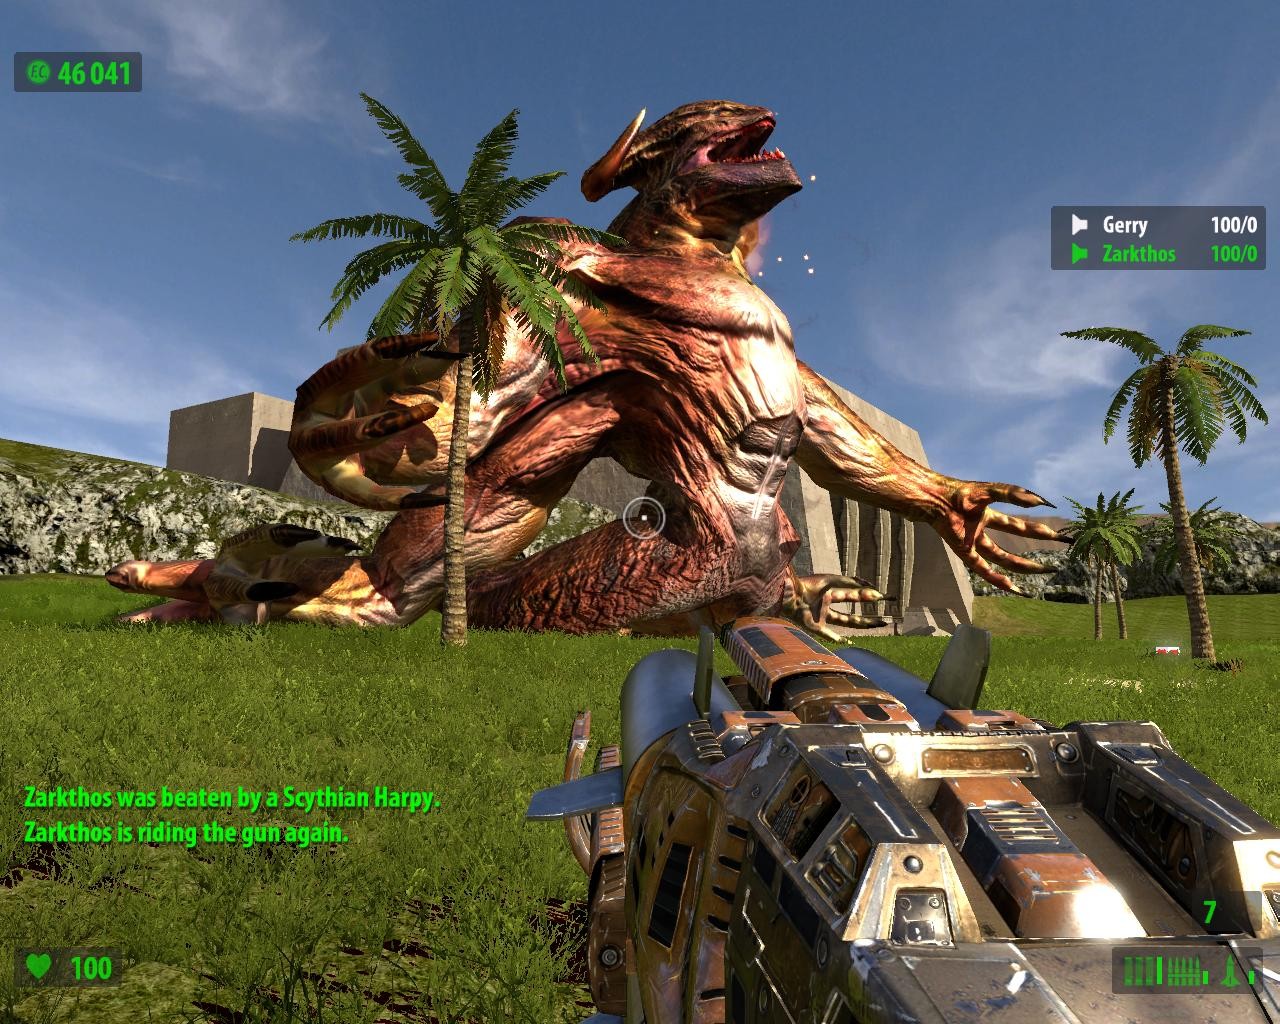 download serious sam second encounter steam for free